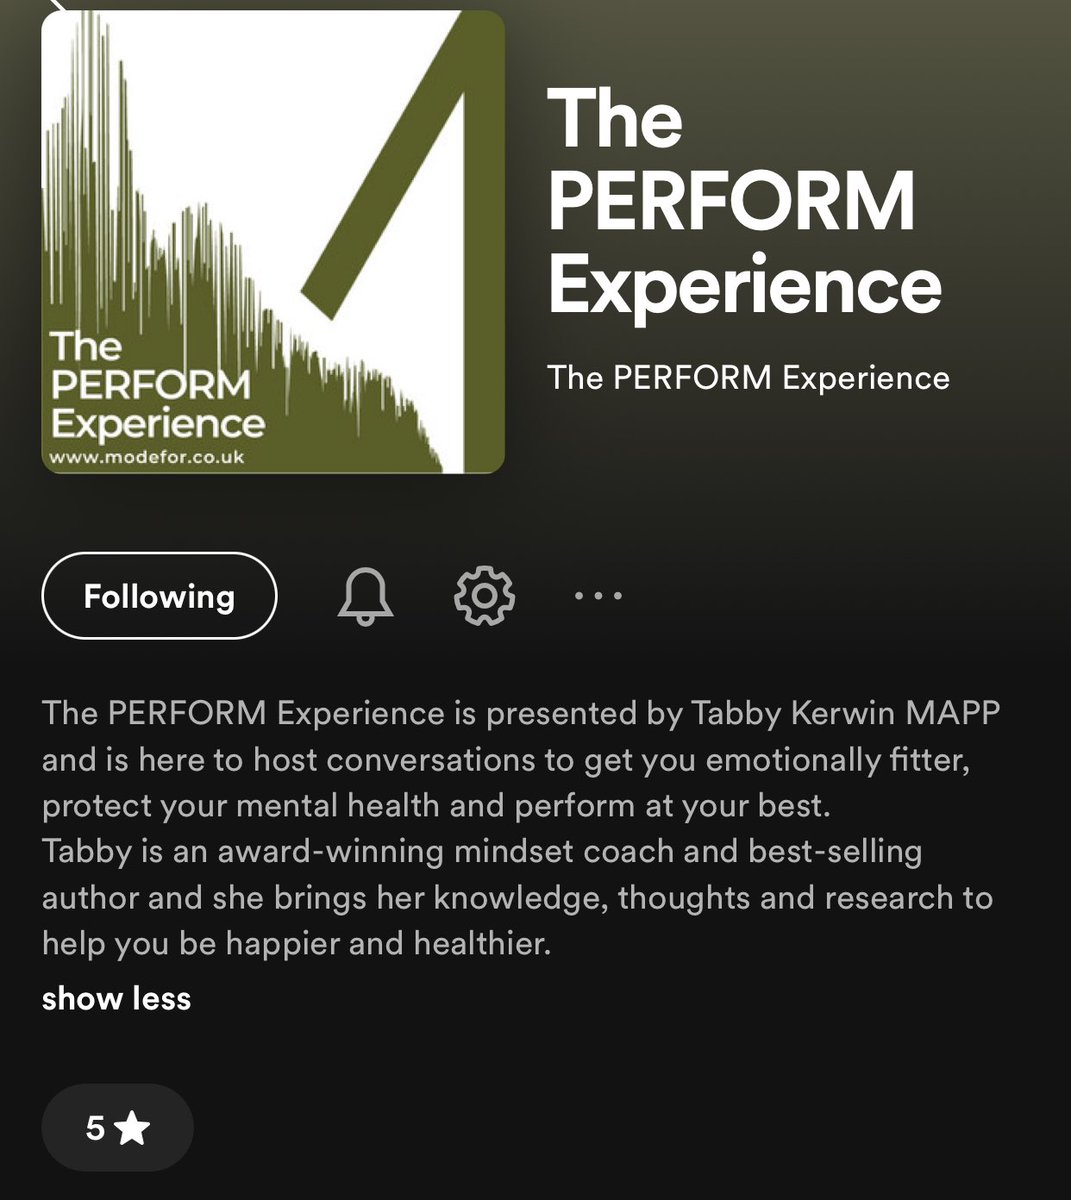 Have you caught the new podcast yet?

It’s got some 5⭐️ ratings already. 

#theperformexperience #perform #mentalhealth #emotionalfitness #peakperformance #podcast #havealisten